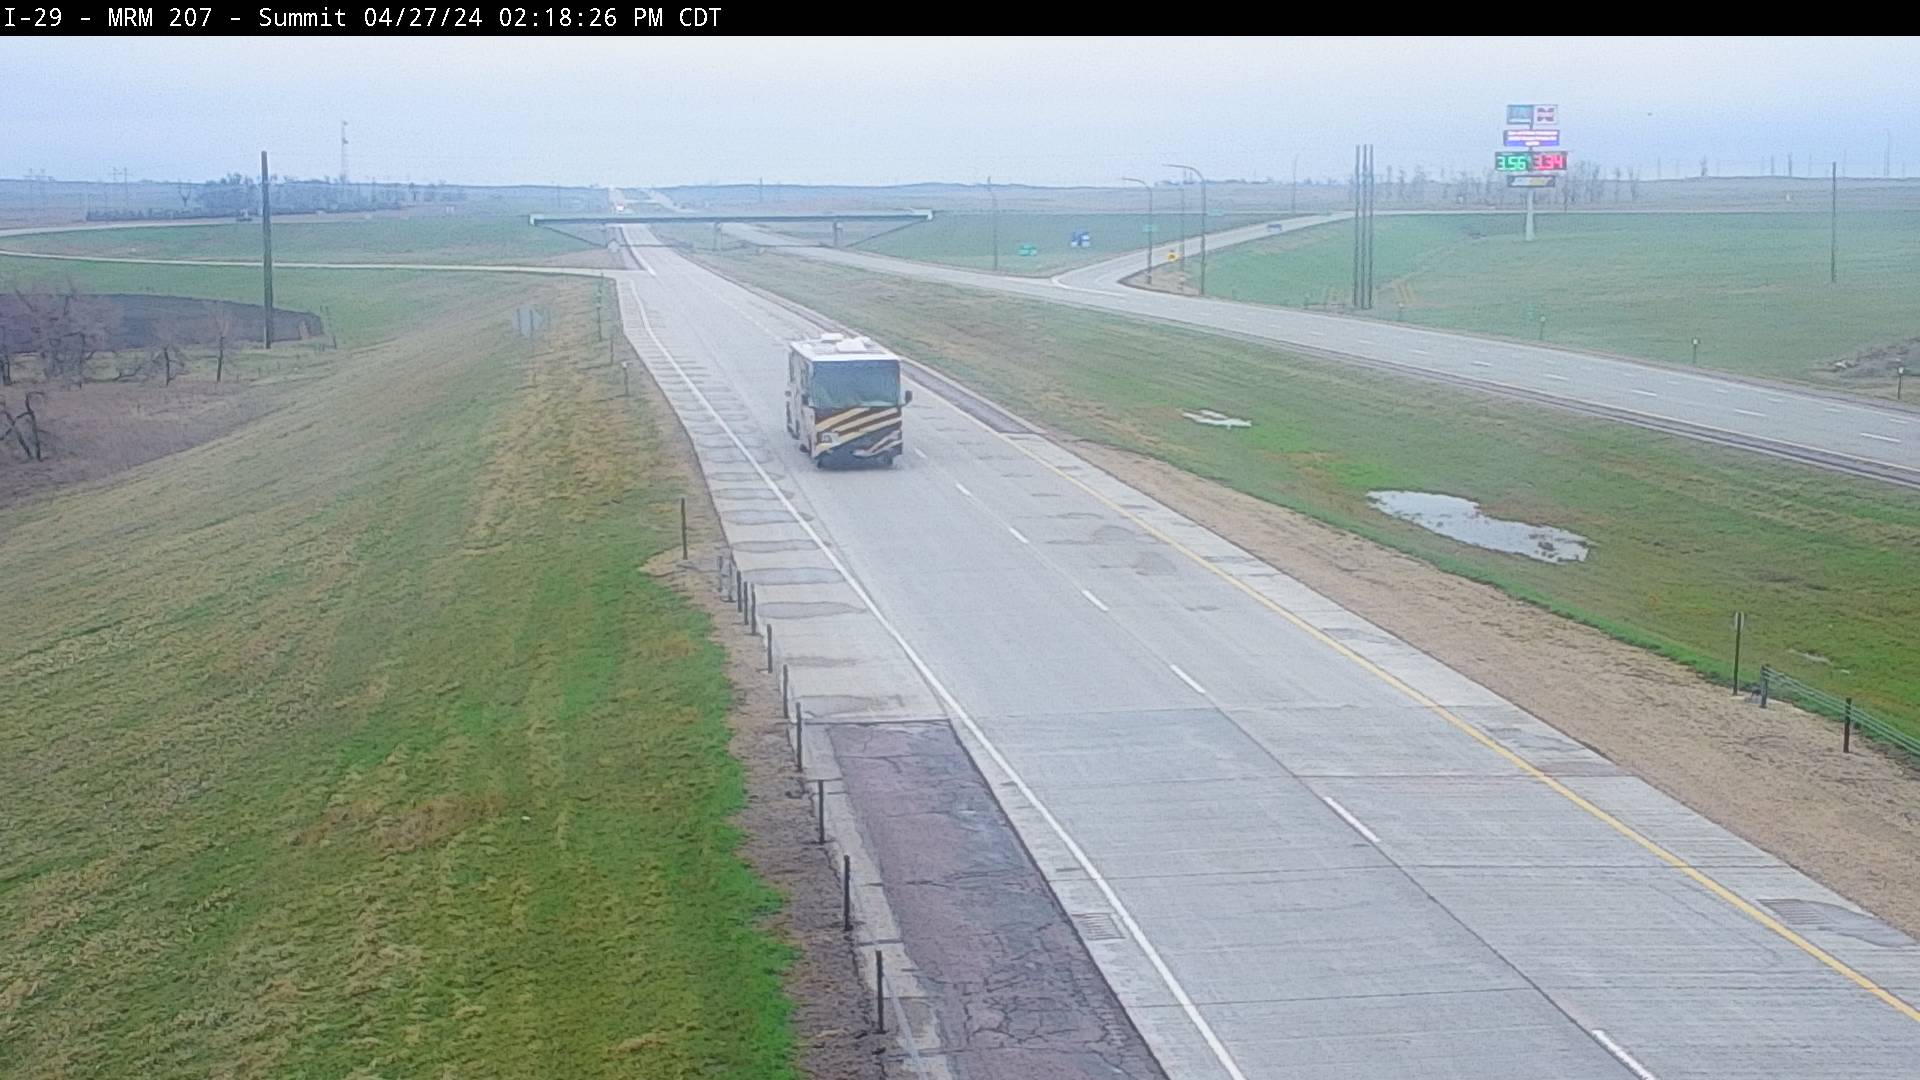 West of town along I-29 @ MP 207 - North Traffic Camera